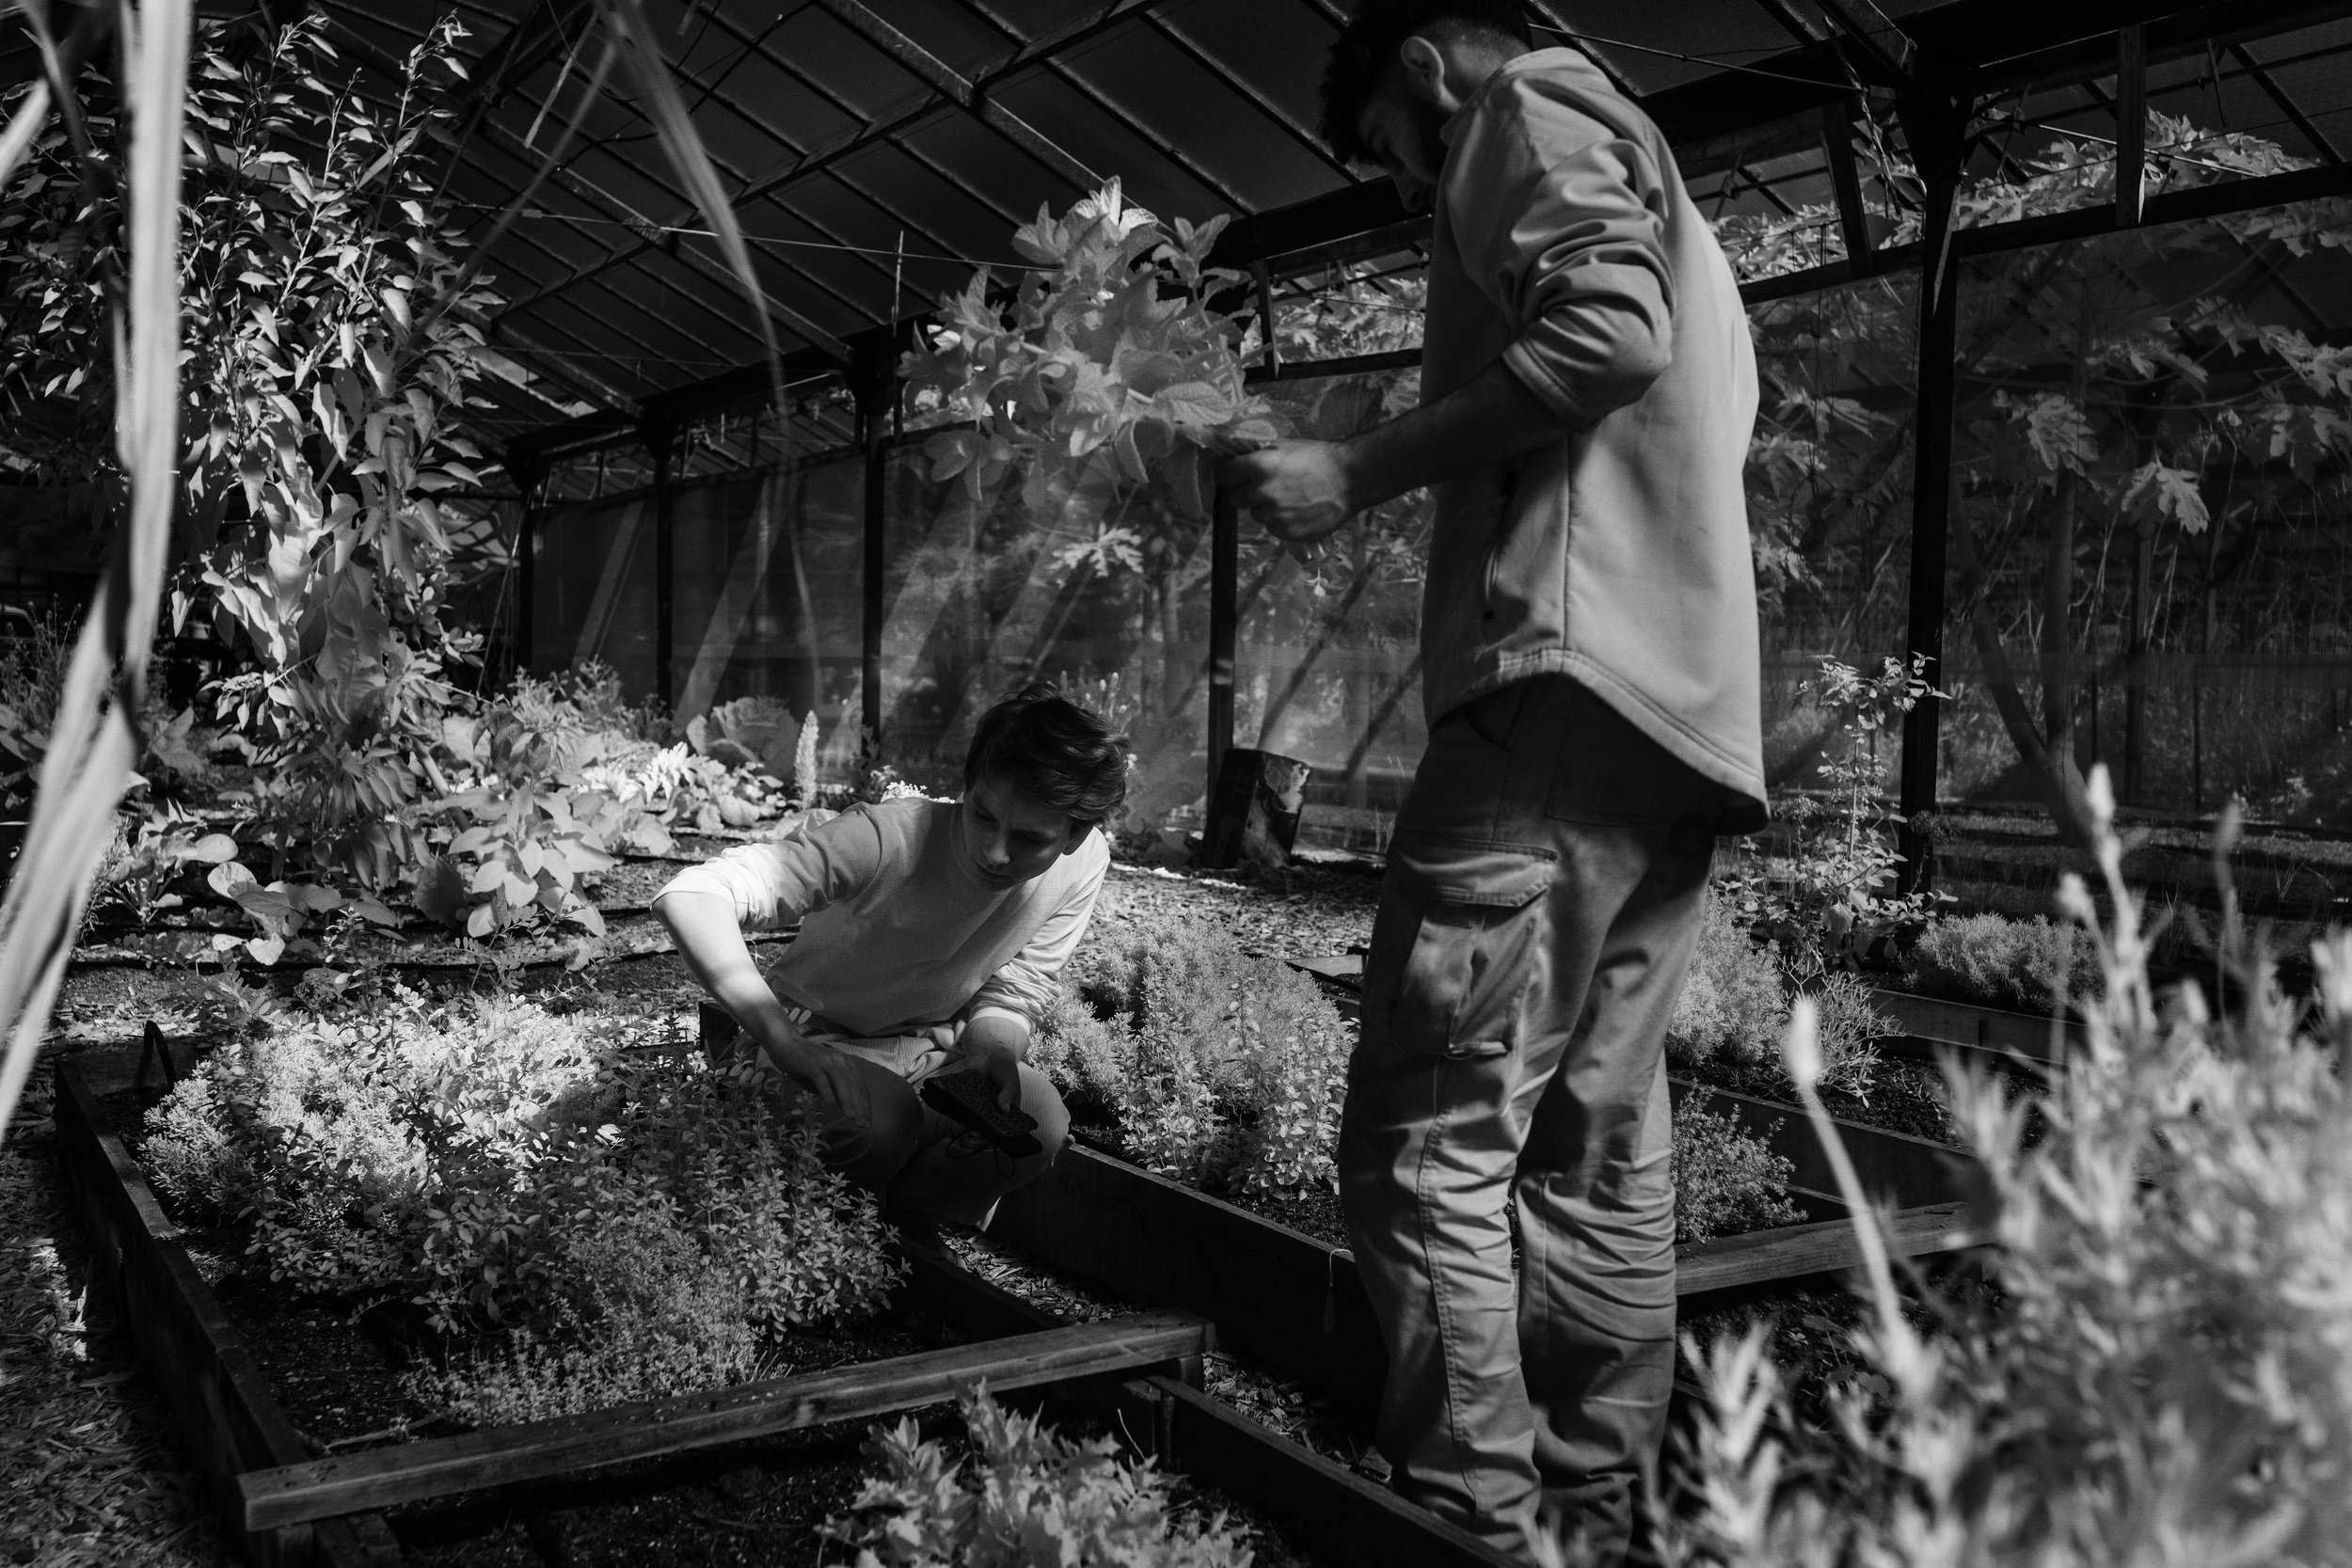  Photo by Pep Bonet / NOOR 2022Bunyola, Mallorca, Balearic Islands, Spain.Part of the series "Terrallum" Shot on Infrared. Eric (left) and Mohamed (right) picking up fresh herbs during the market day at Circle Carbon Labs. 